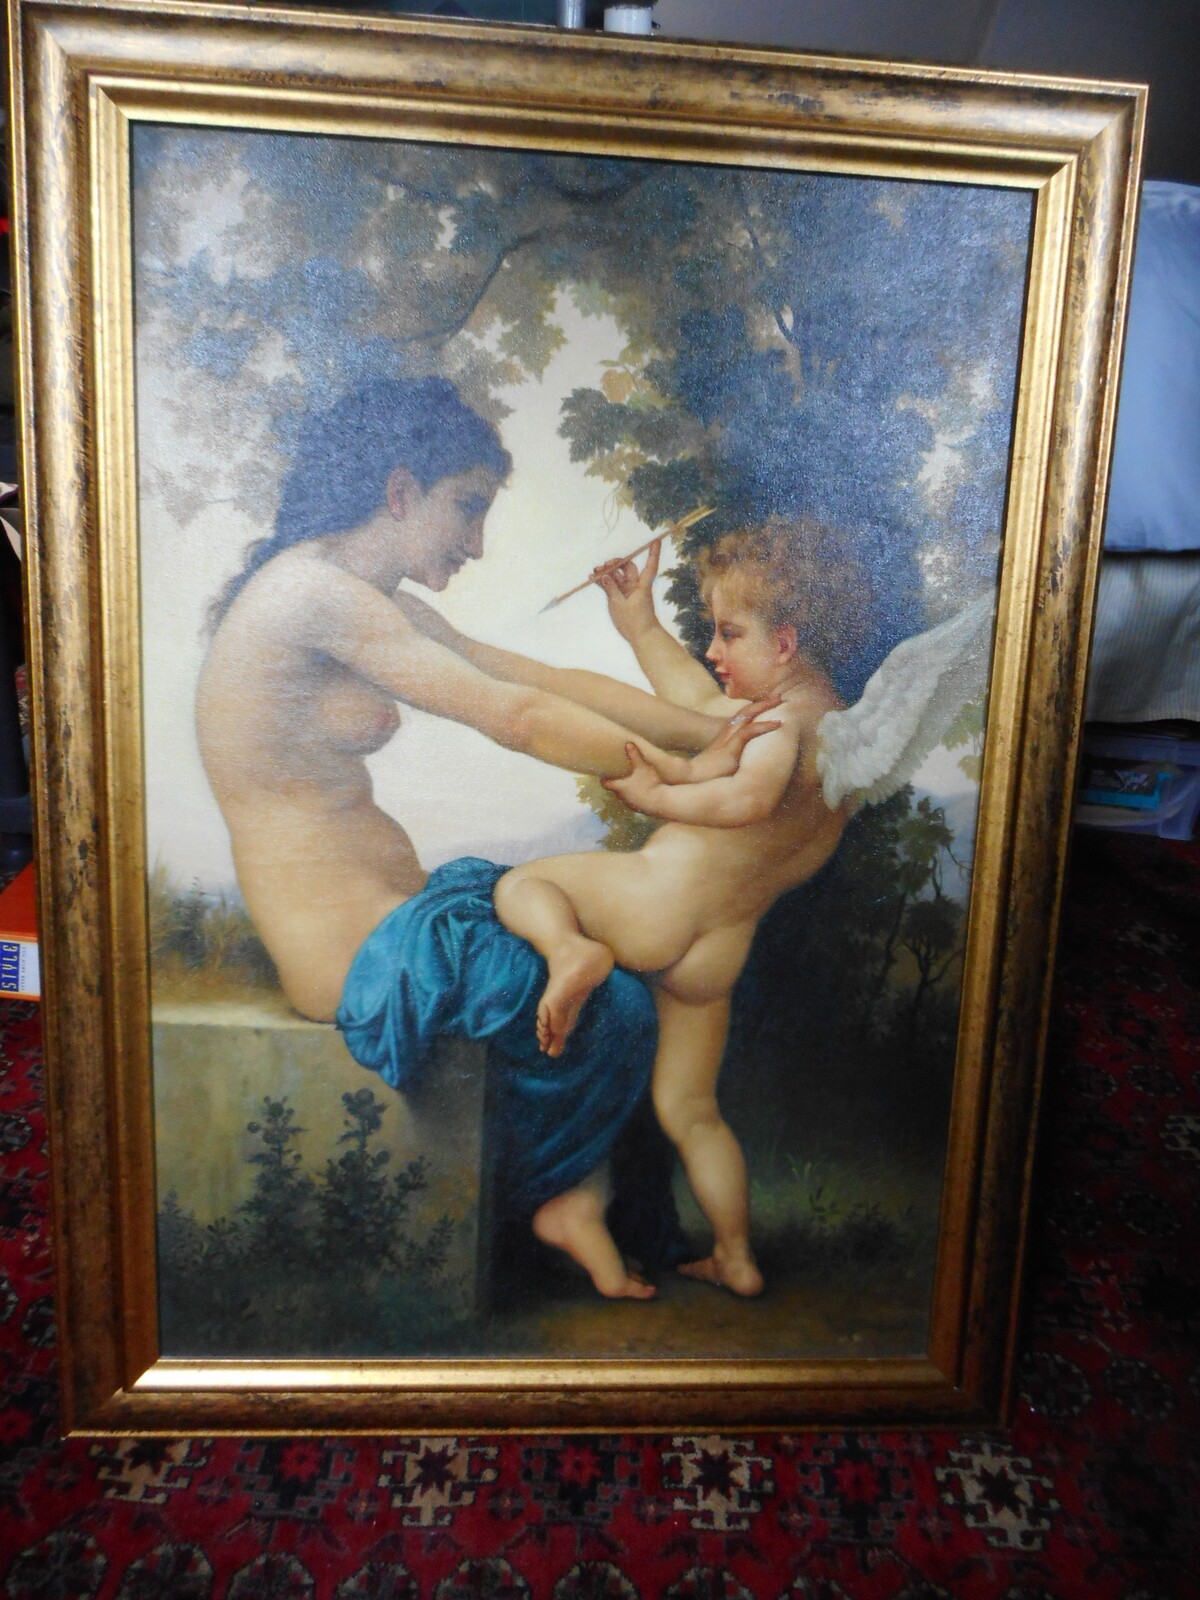 Young Girl Defending herself agains Eros - After William Bouguereau.